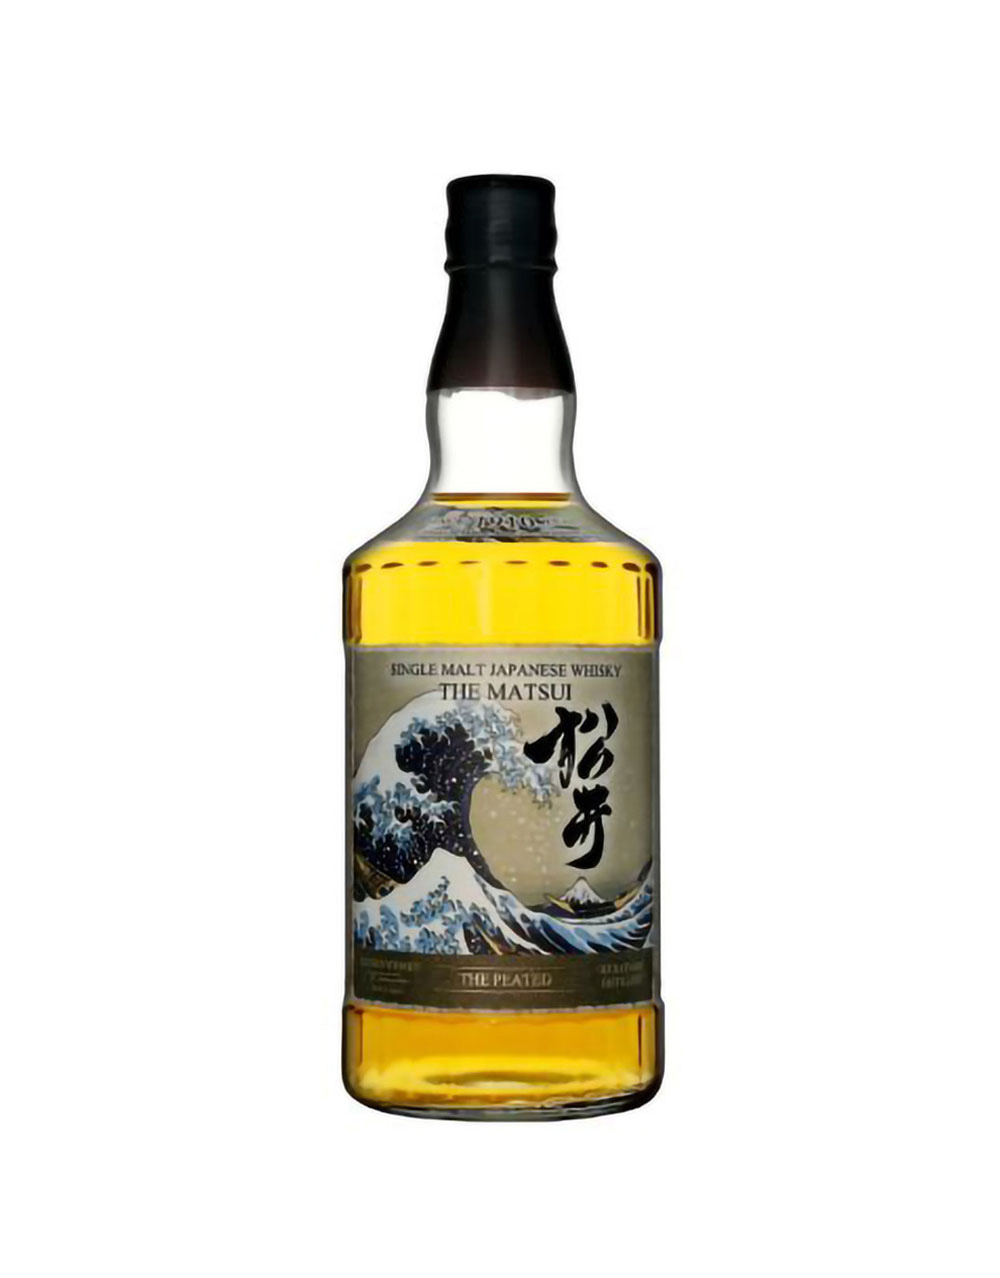 Matsui The Peated Japanese Whisky